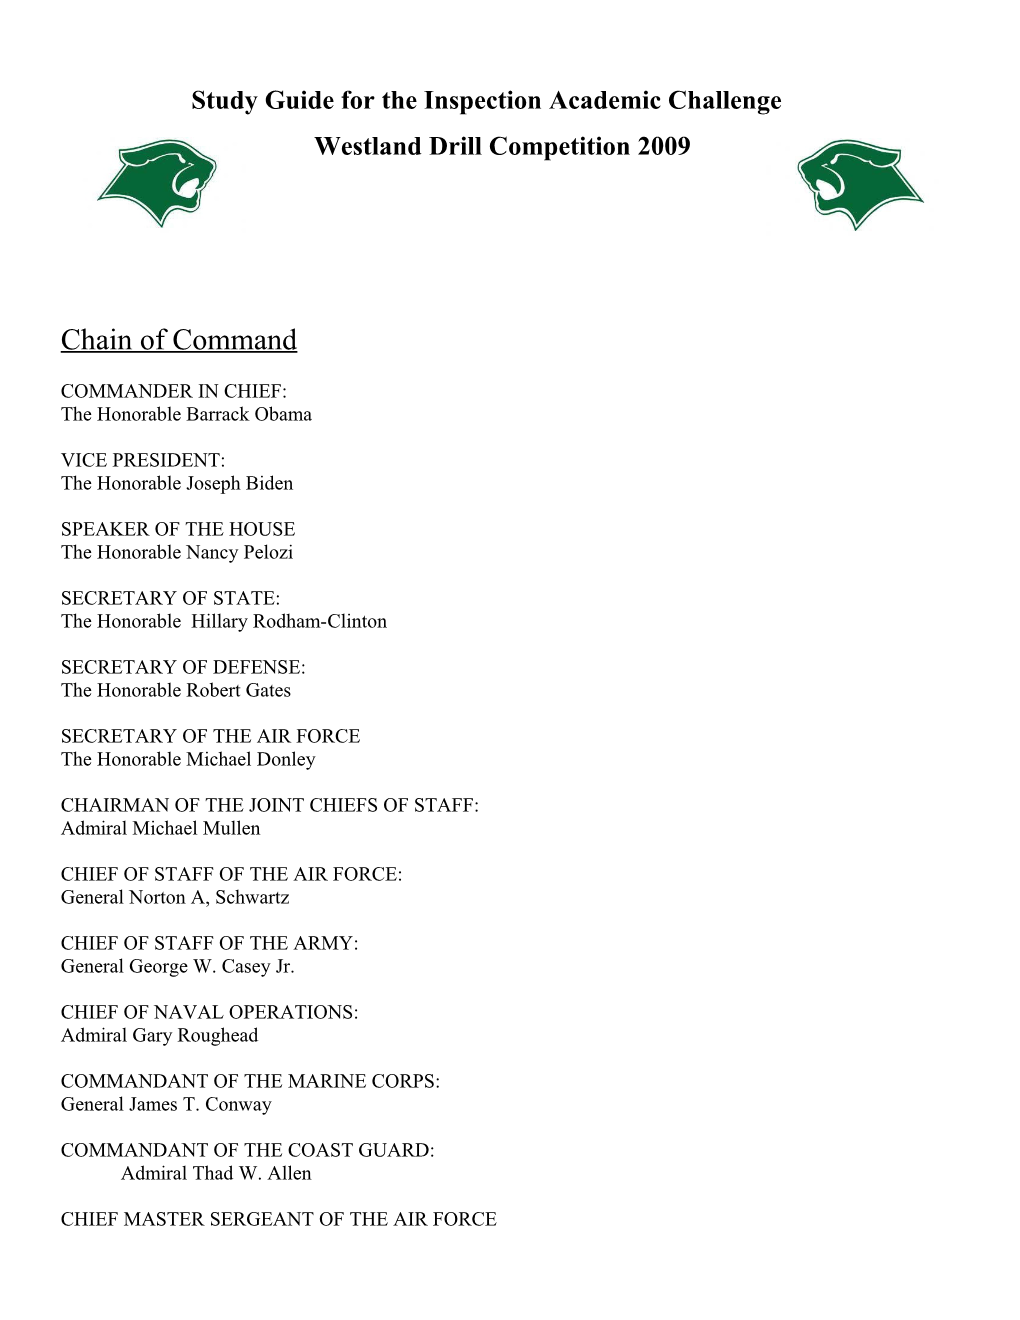 Study Guide for the Academic Quiz Bowl Challenge / Westland Drill Competition 2008